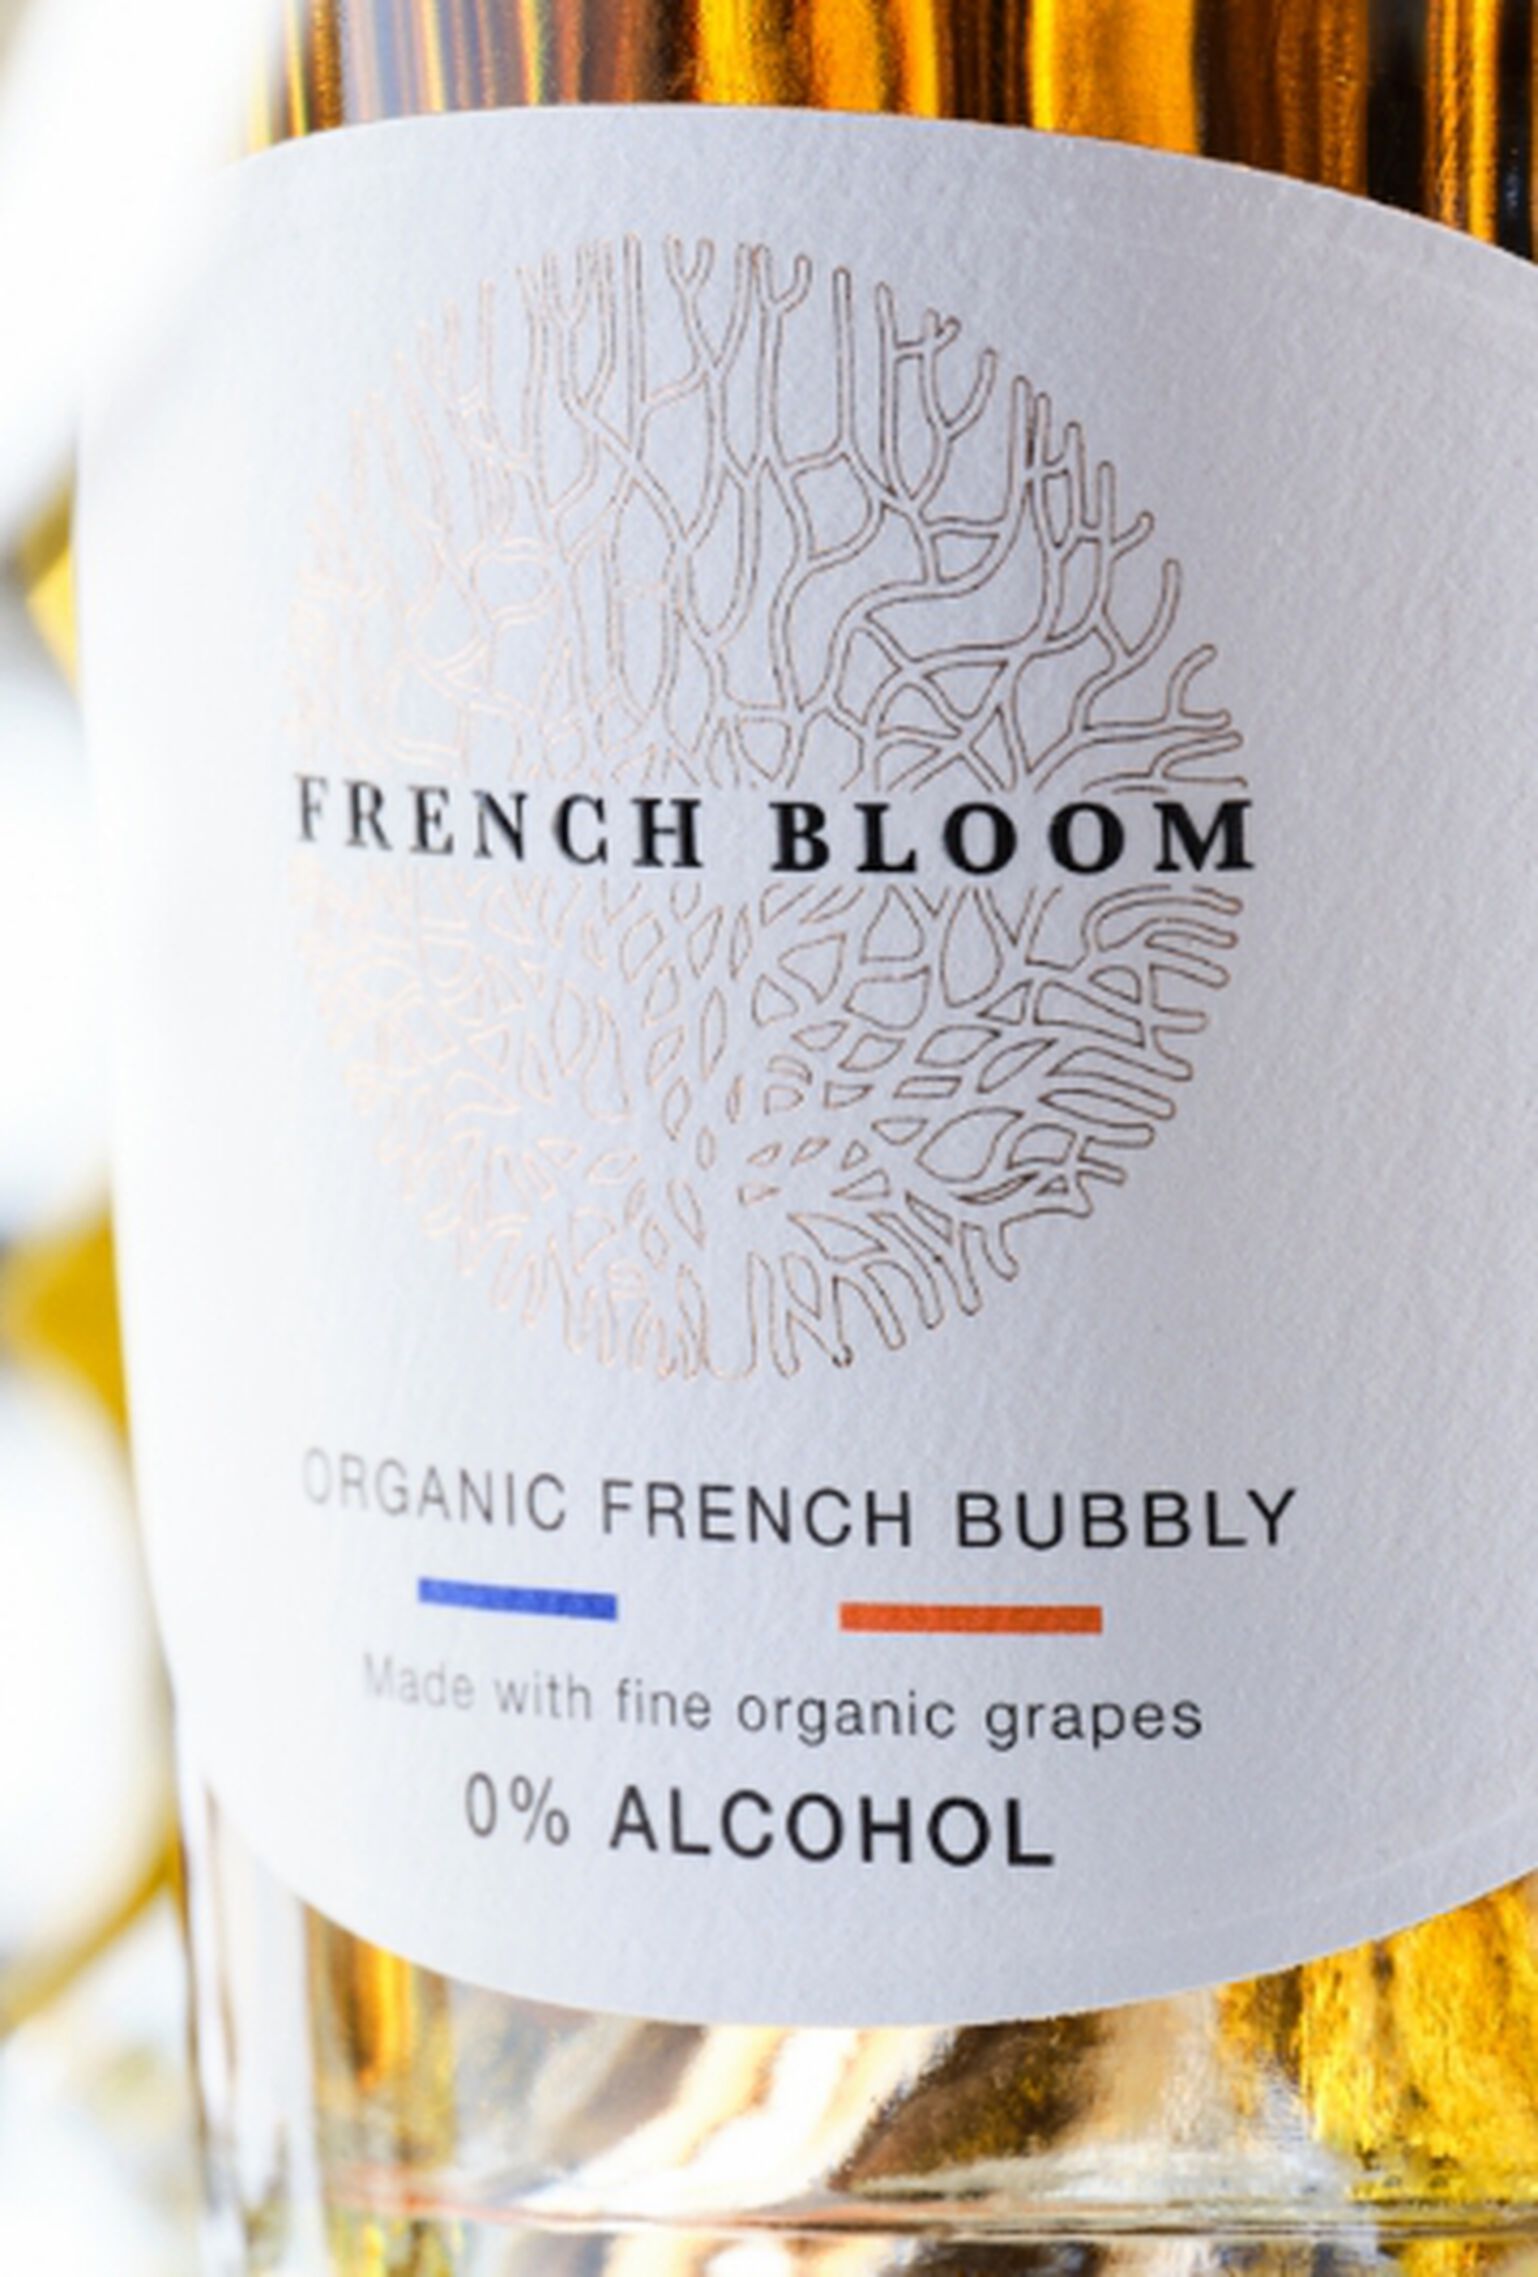 Close up of bottle of French Bloom